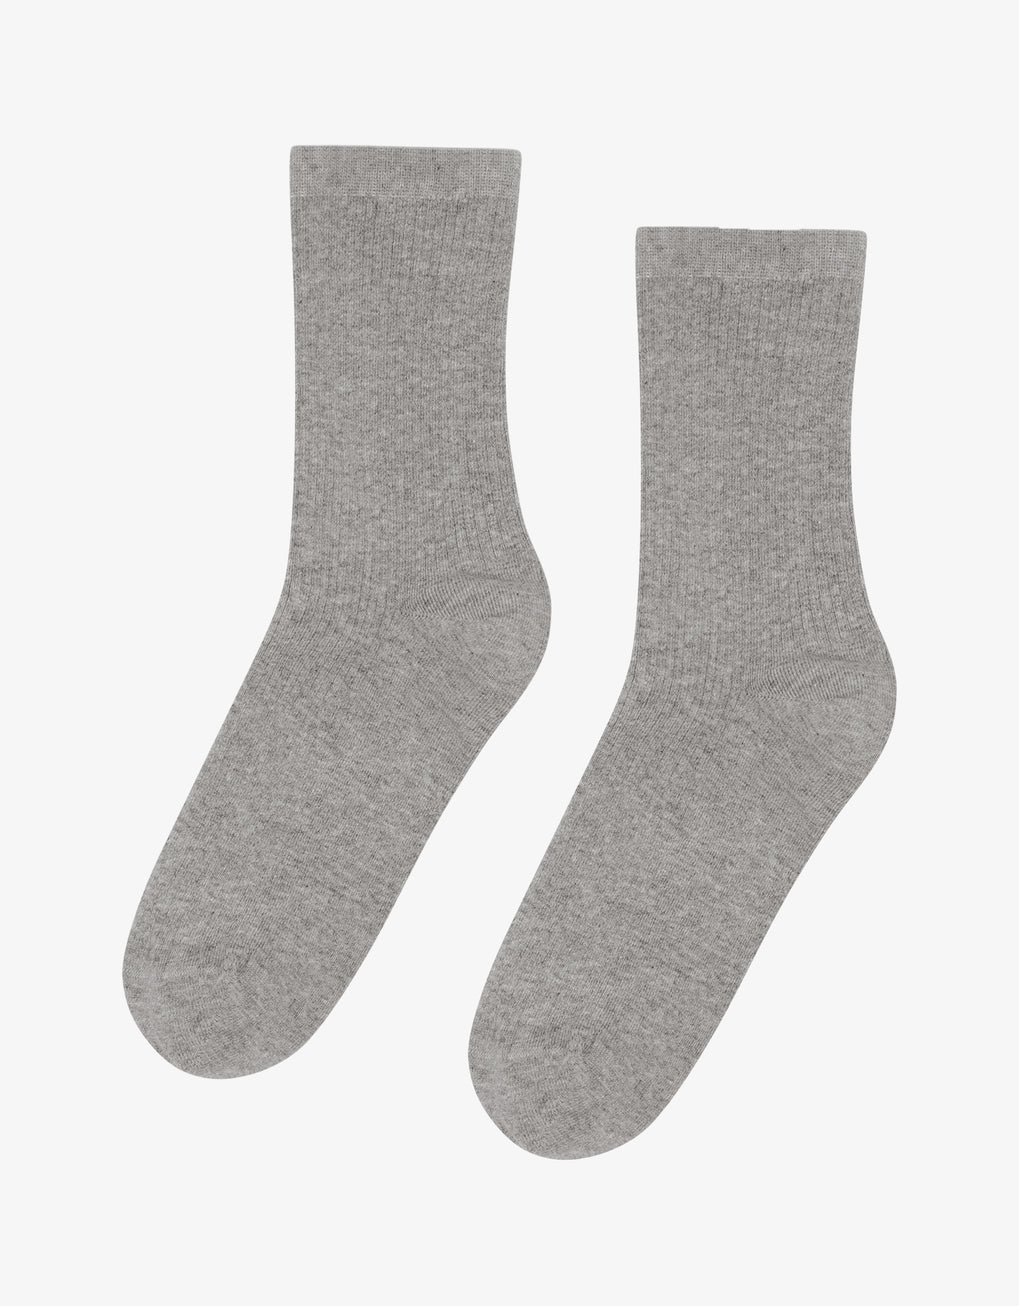 A pair of Colorful Standard Classic Organic Socks, seamless and breathable, on a white background.